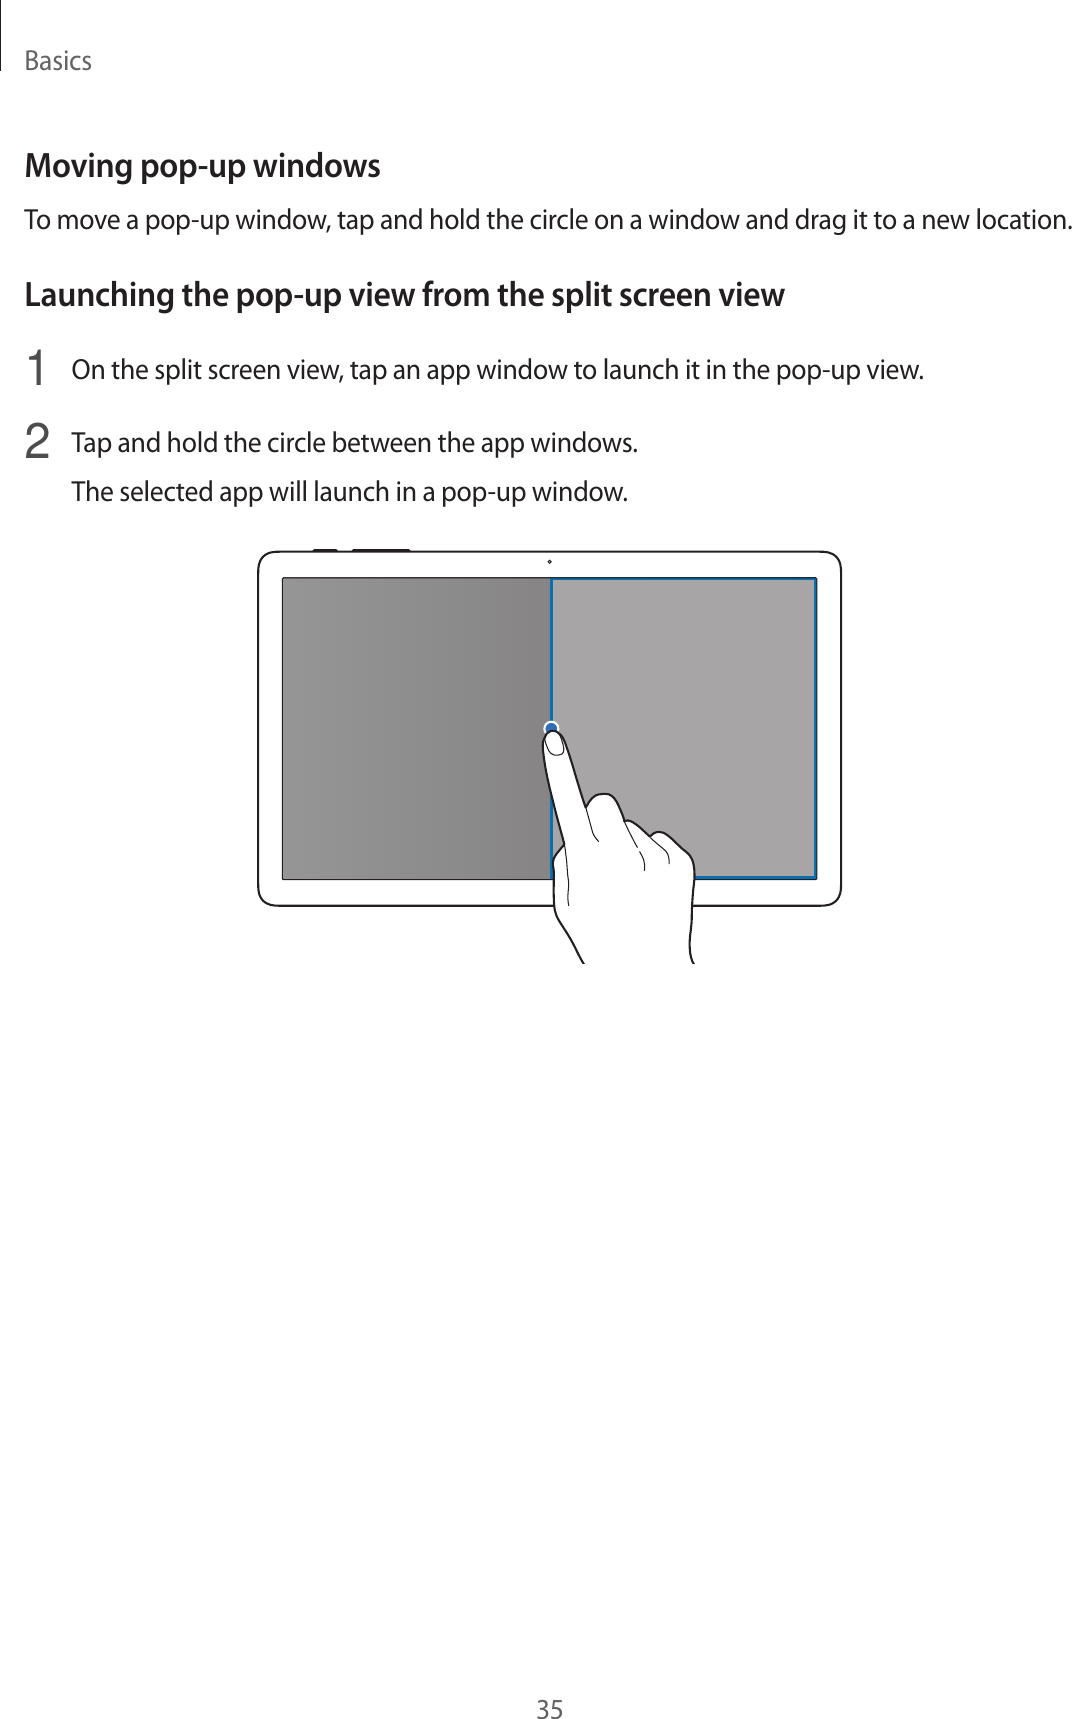 Basics35Moving pop-up windowsTo move a pop-up window, tap and hold the circle on a window and drag it to a new location.Launching the pop-up view from the split screen view1  On the split screen view, tap an app window to launch it in the pop-up view.2  Tap and hold the circle between the app windows.The selected app will launch in a pop-up window.